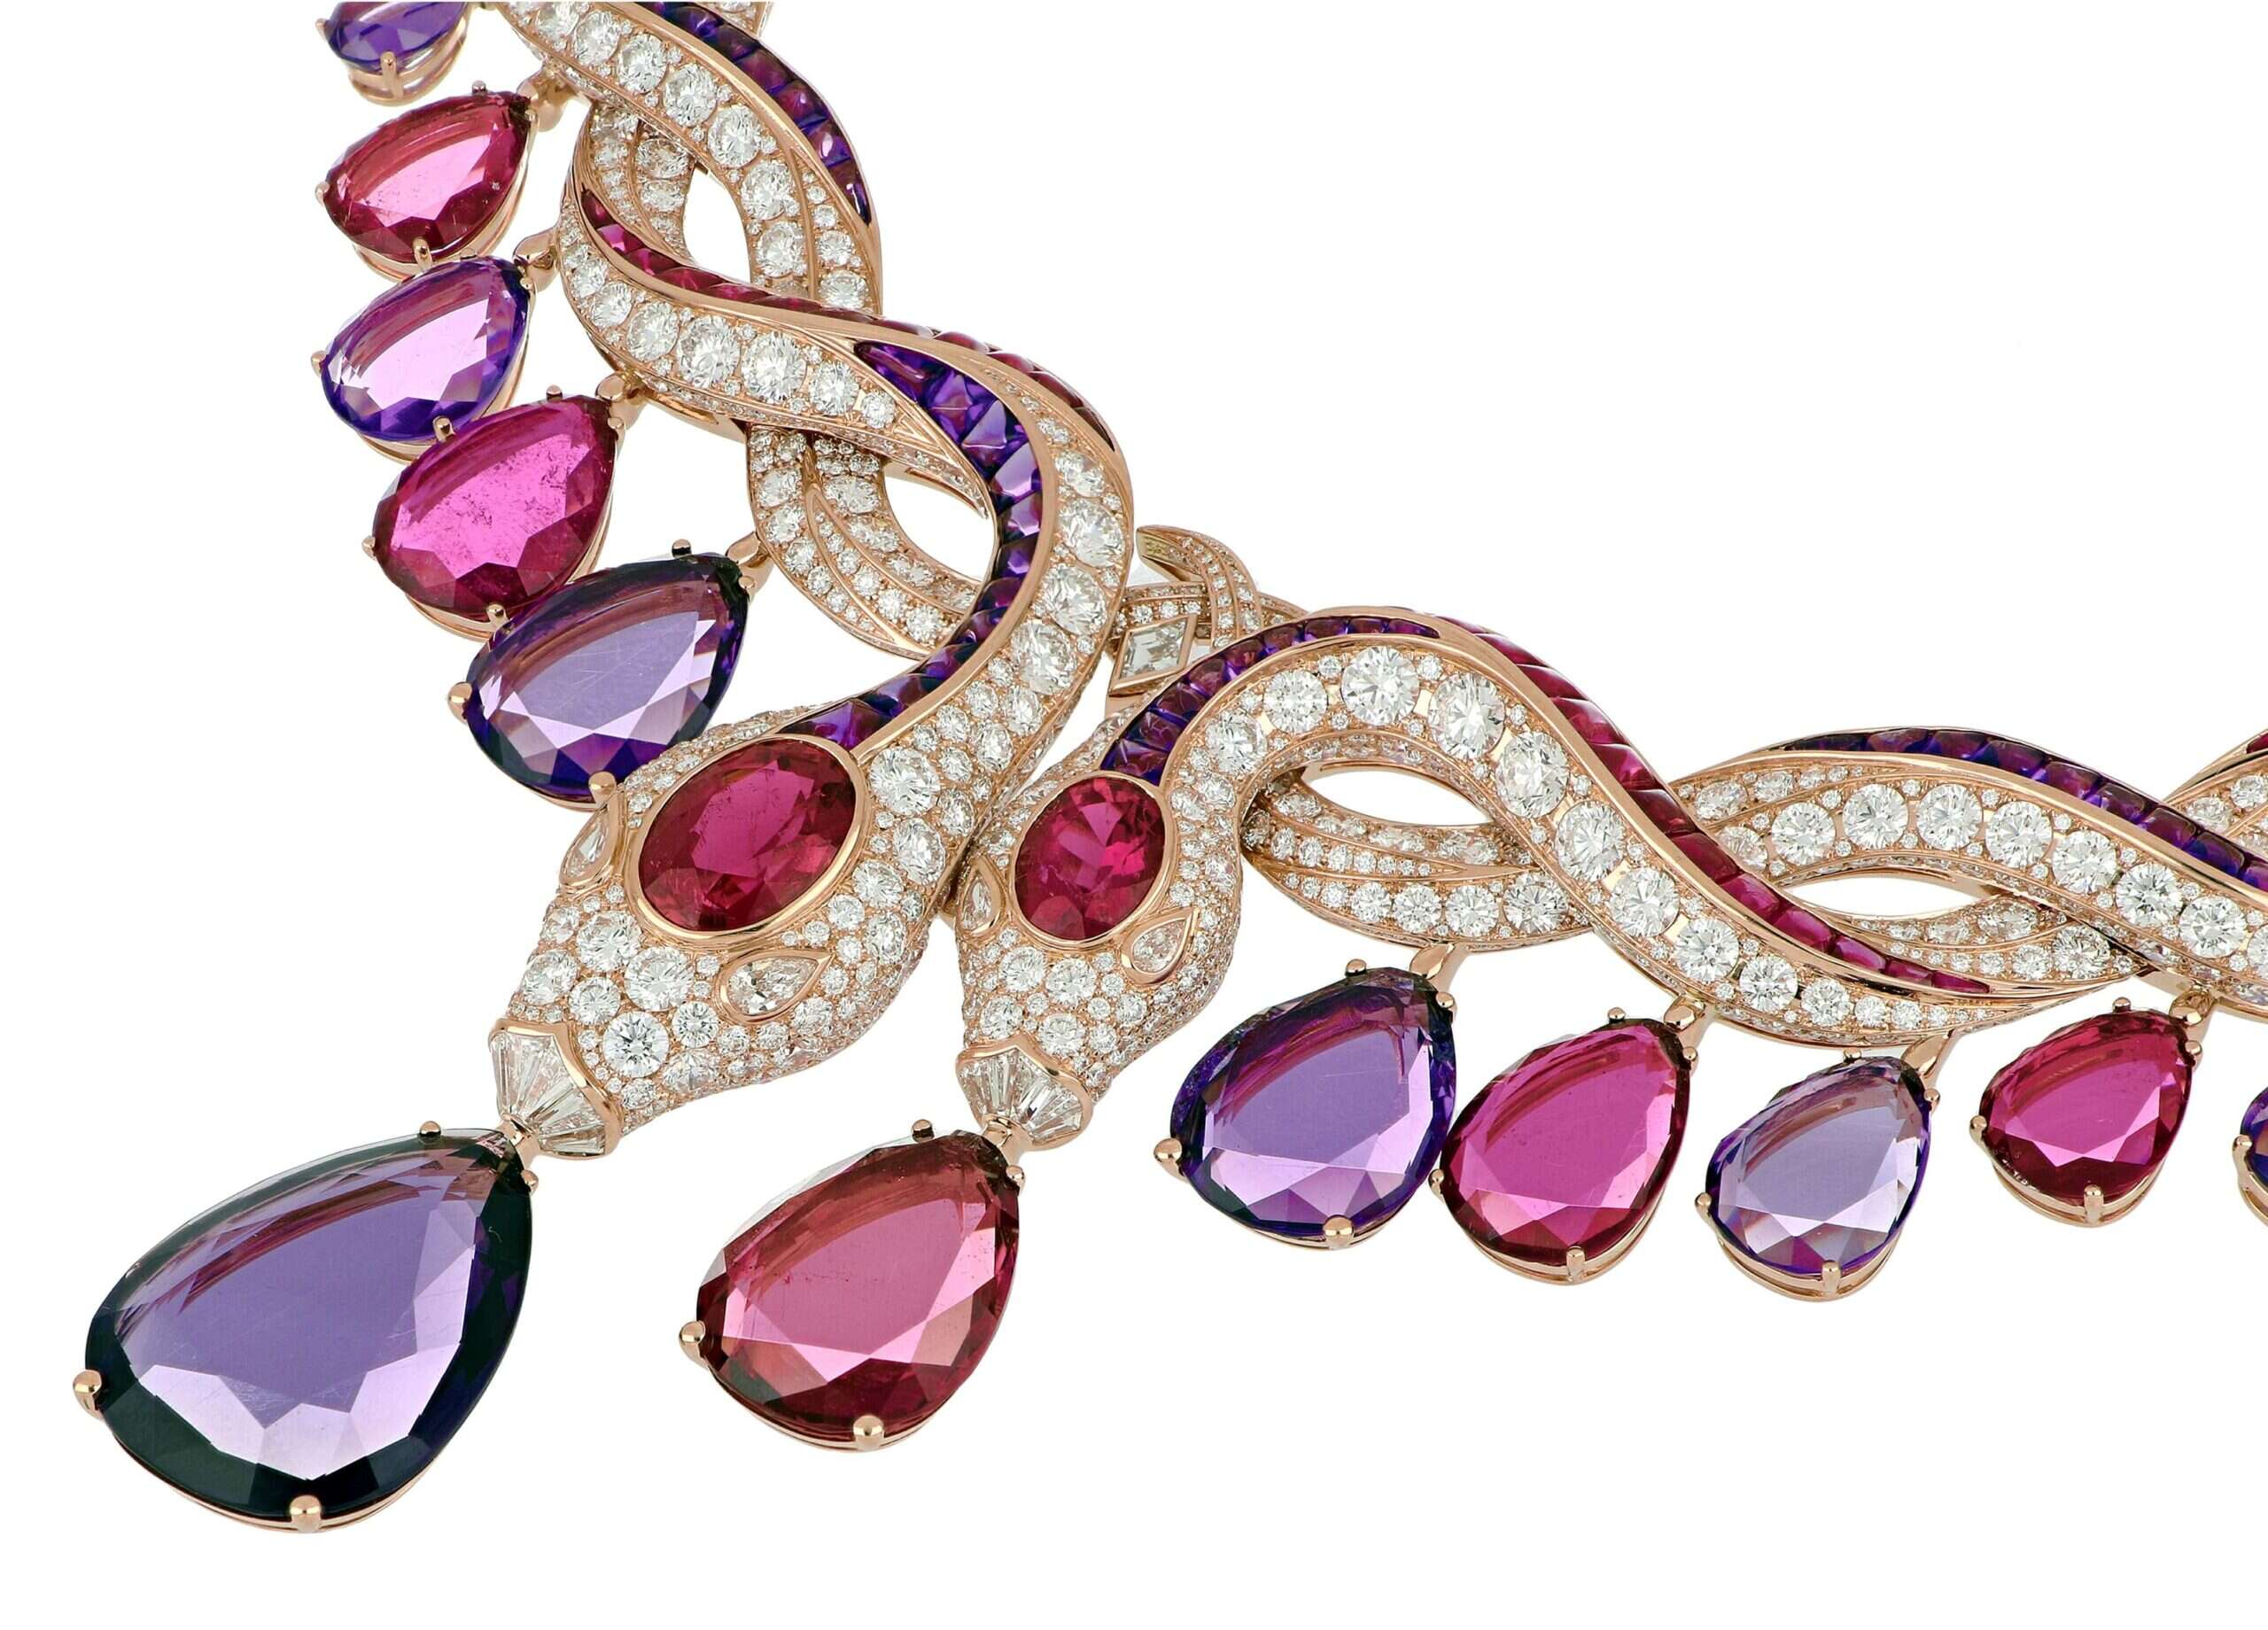 Paris High Jewelry Collections - Chopard  Pink diamond, Pink diamond ring,  Engagement rings